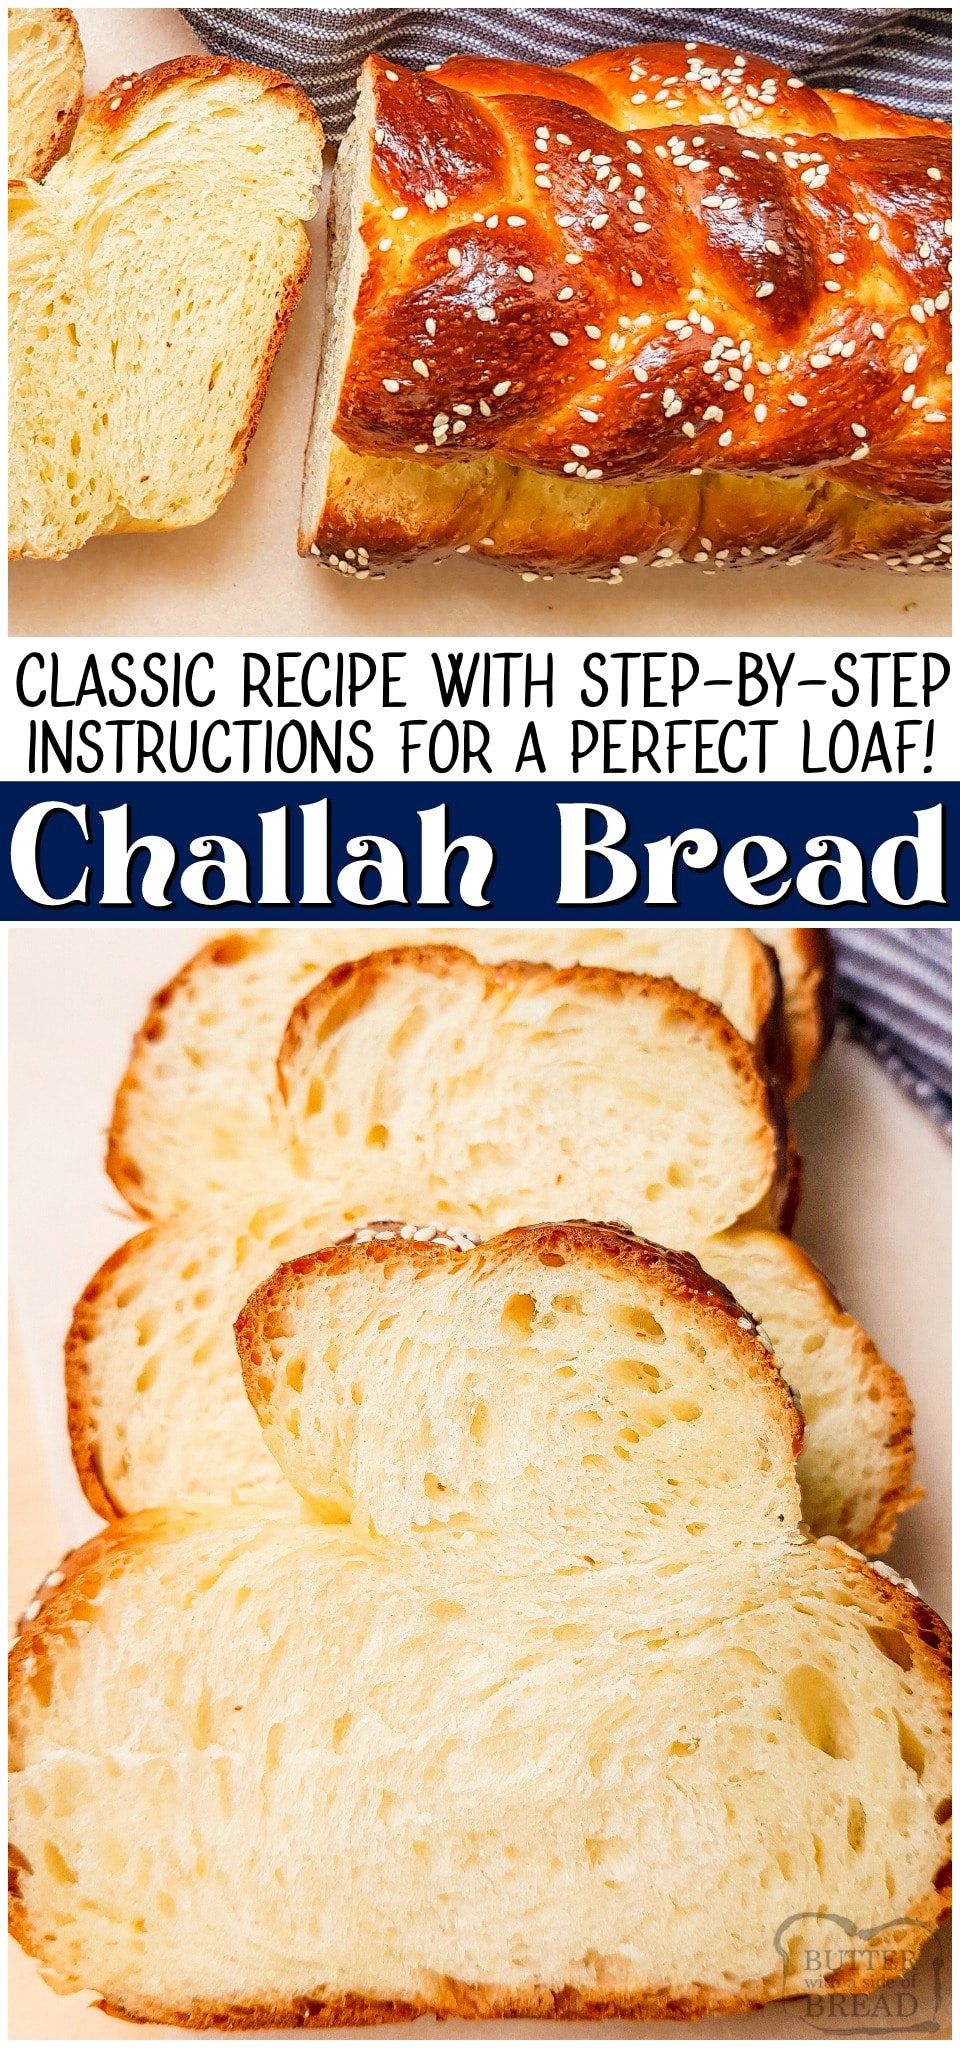 Classic Challah Bread recipe made with flour, milk & eggs. Easy Challah with step-by-step instructions for perfect bread with a lovely soft, feathery texture.